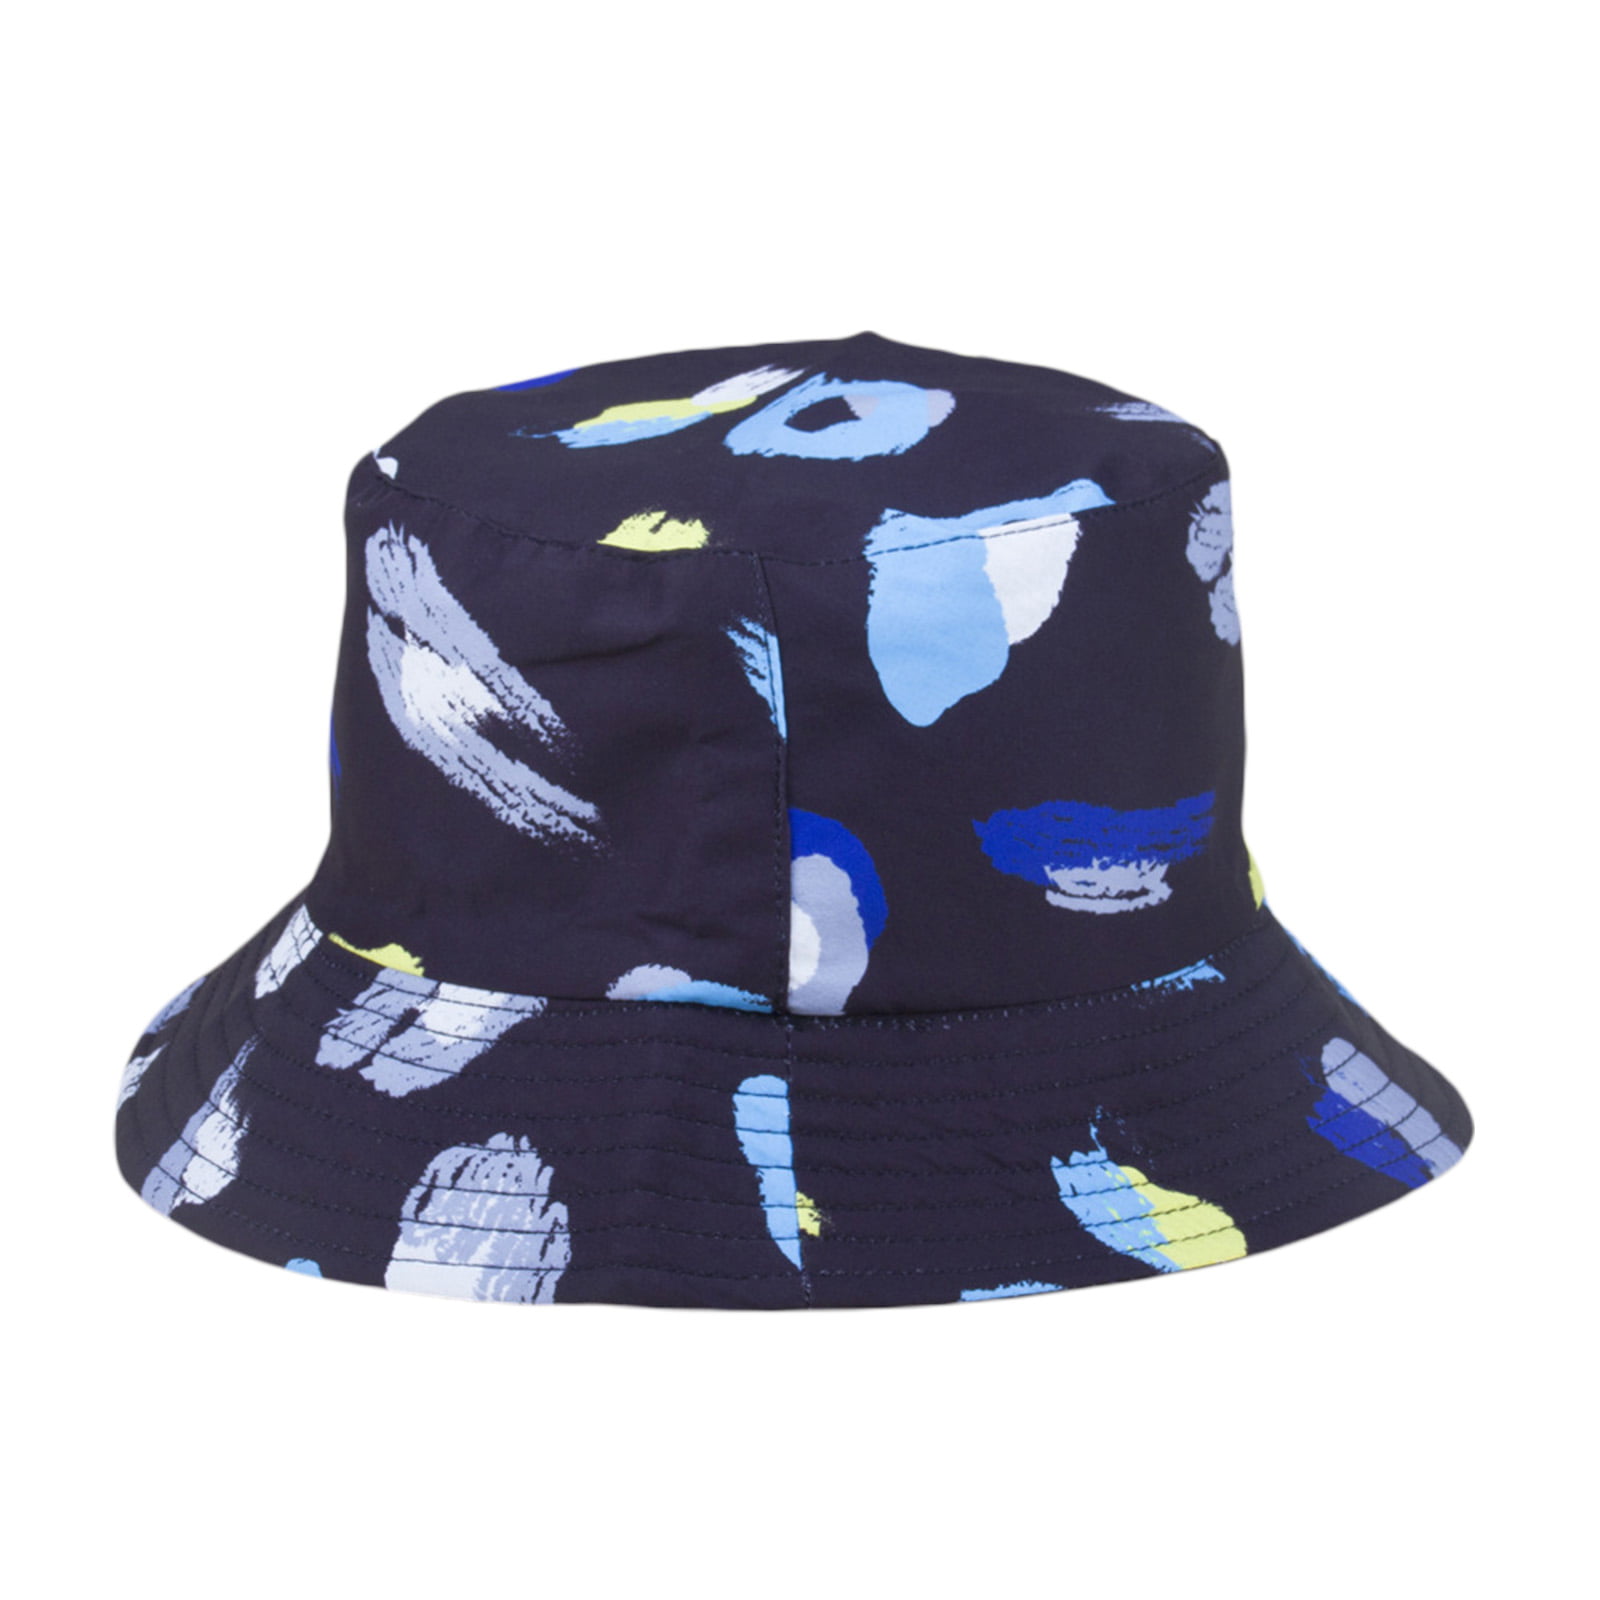 Teens Women and Men with Customize Top Packable Fisherman Cap for Outdoor Travel Pink Flamingo Ice Cream Summer New Summer Unisex Cotton Fashion Fishing Sun Bucket Hats for Kid